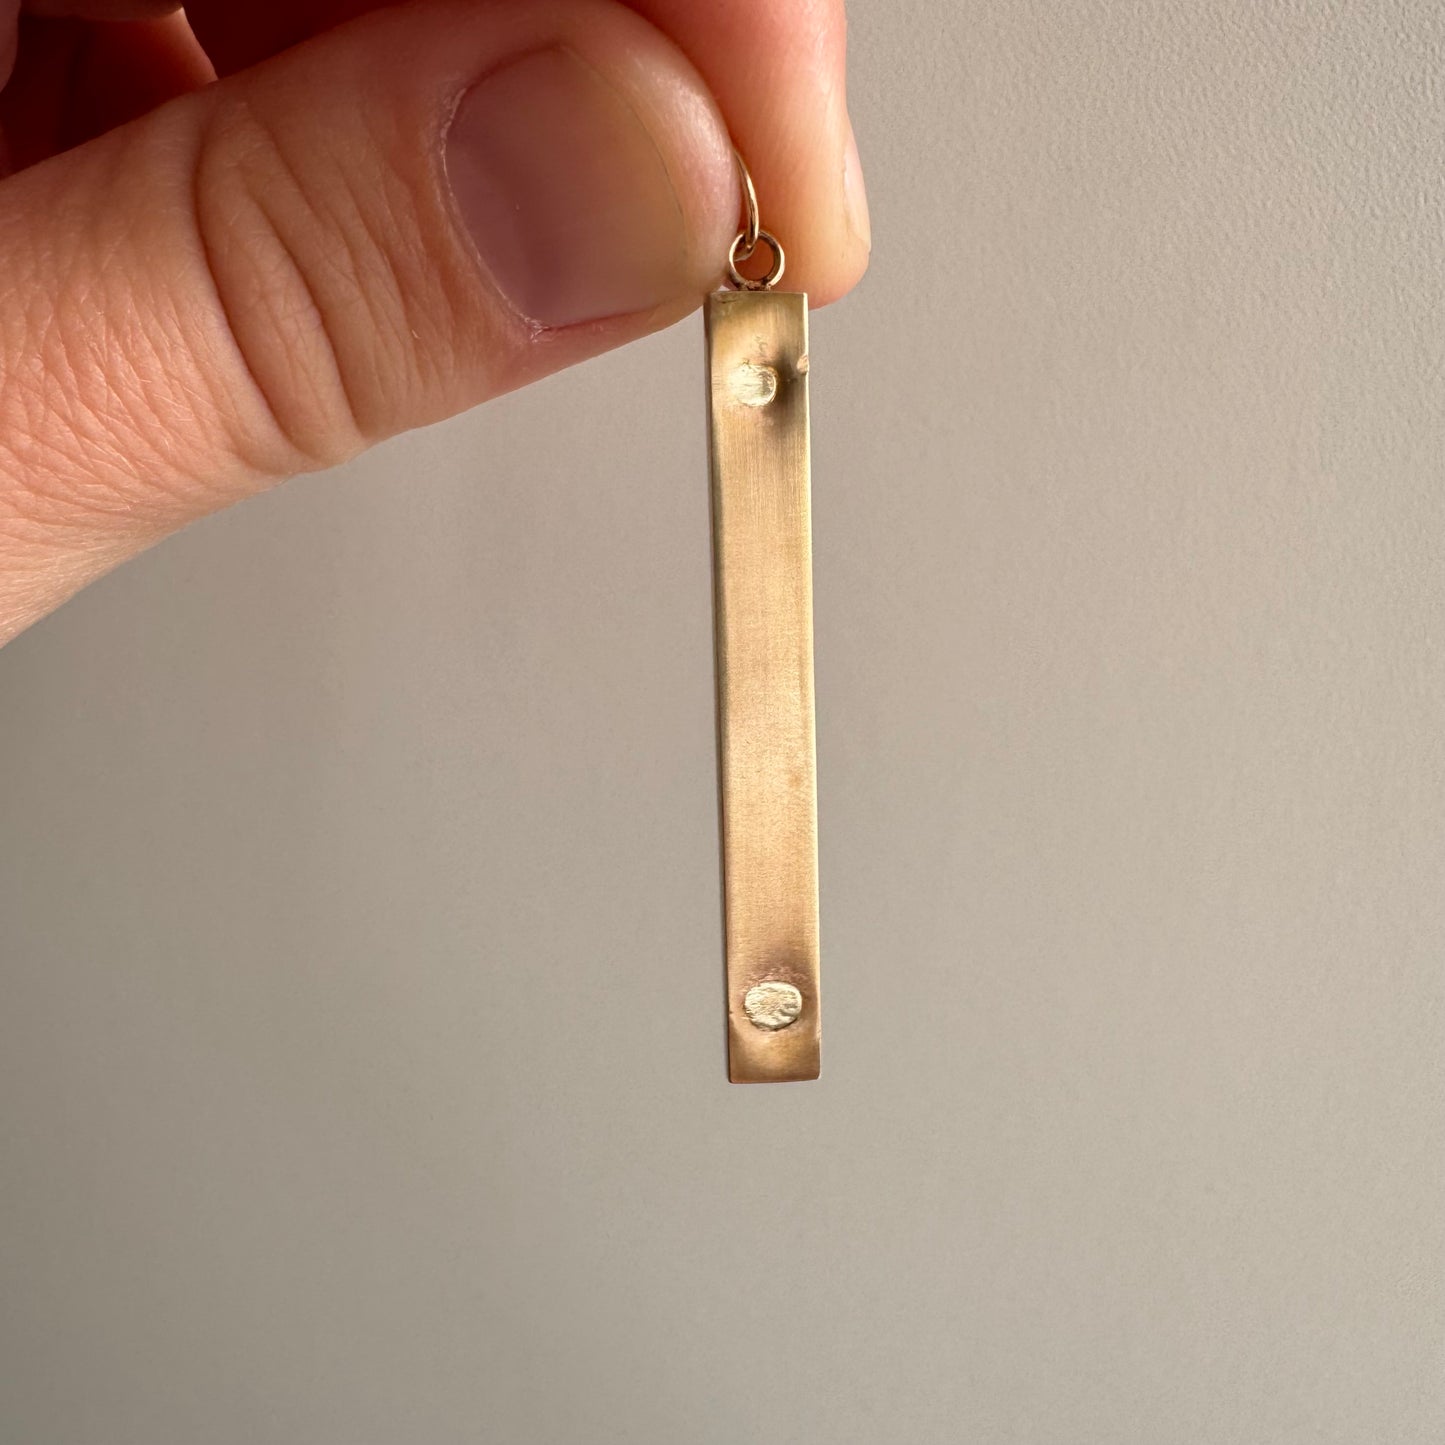 reimagined A N T I Q U E // timeless Mother / 10k yellow gold Mother bar pendant / a brooch conversion